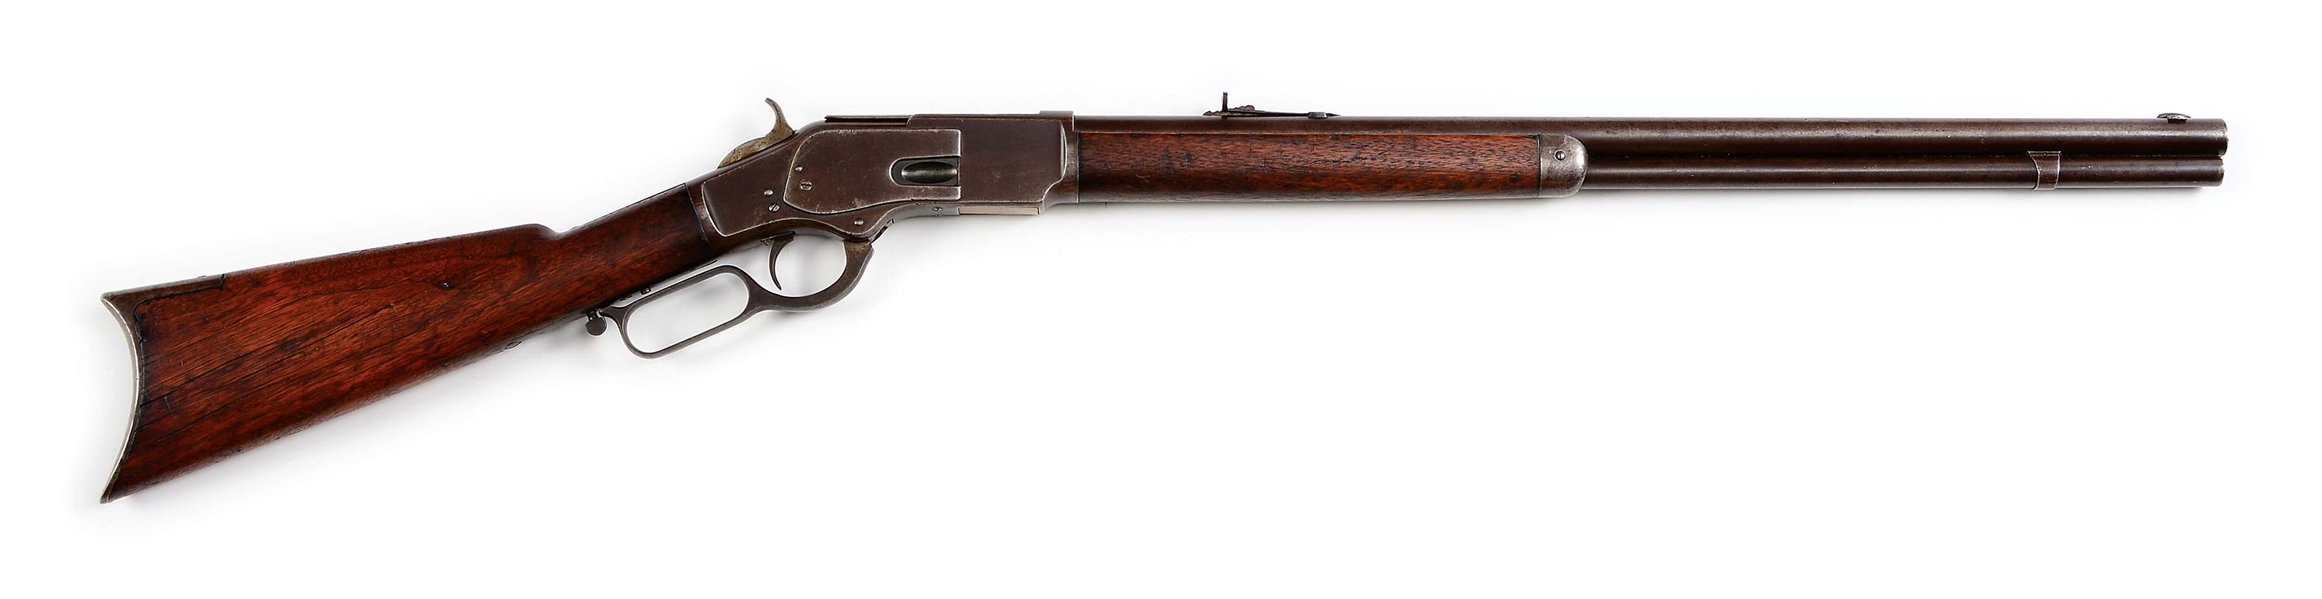 (A) FIRST MODEL WINCHESTER MODEL 1873 LEVER ACTION RIFLE (1877).